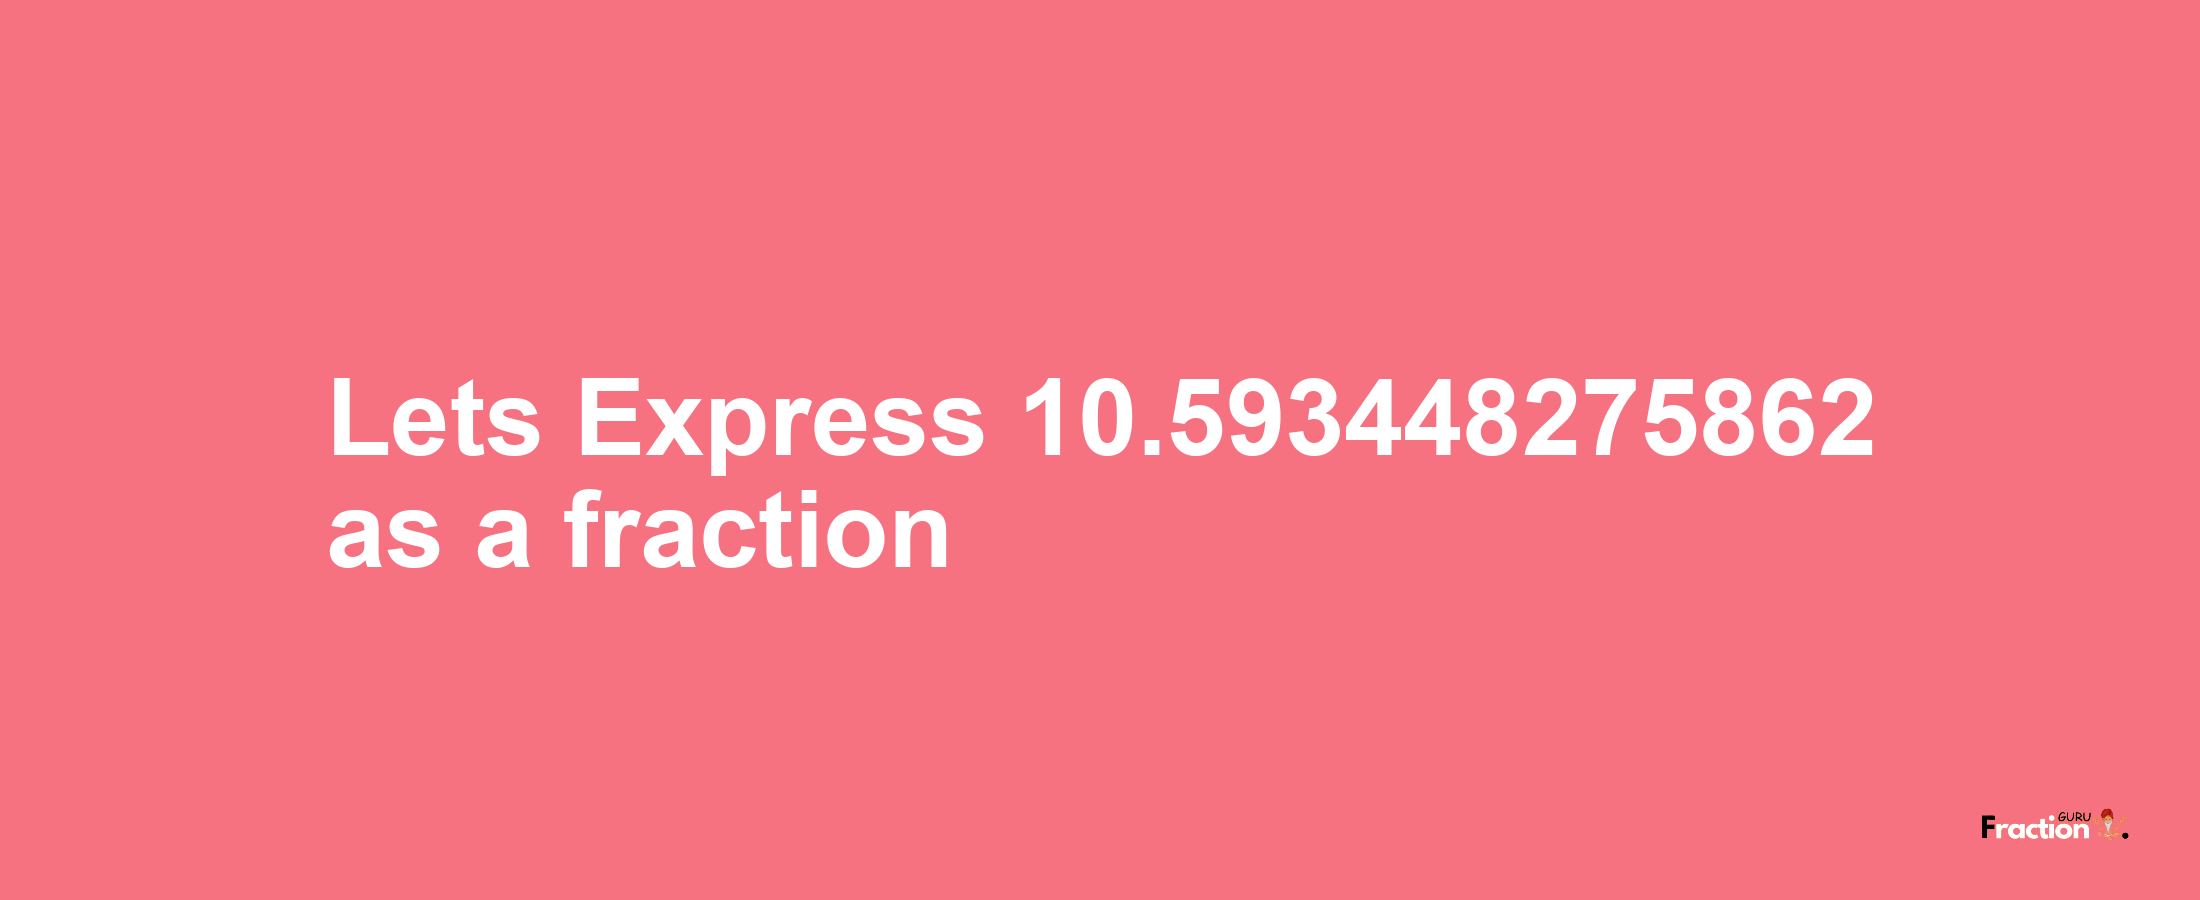 Lets Express 10.593448275862 as afraction